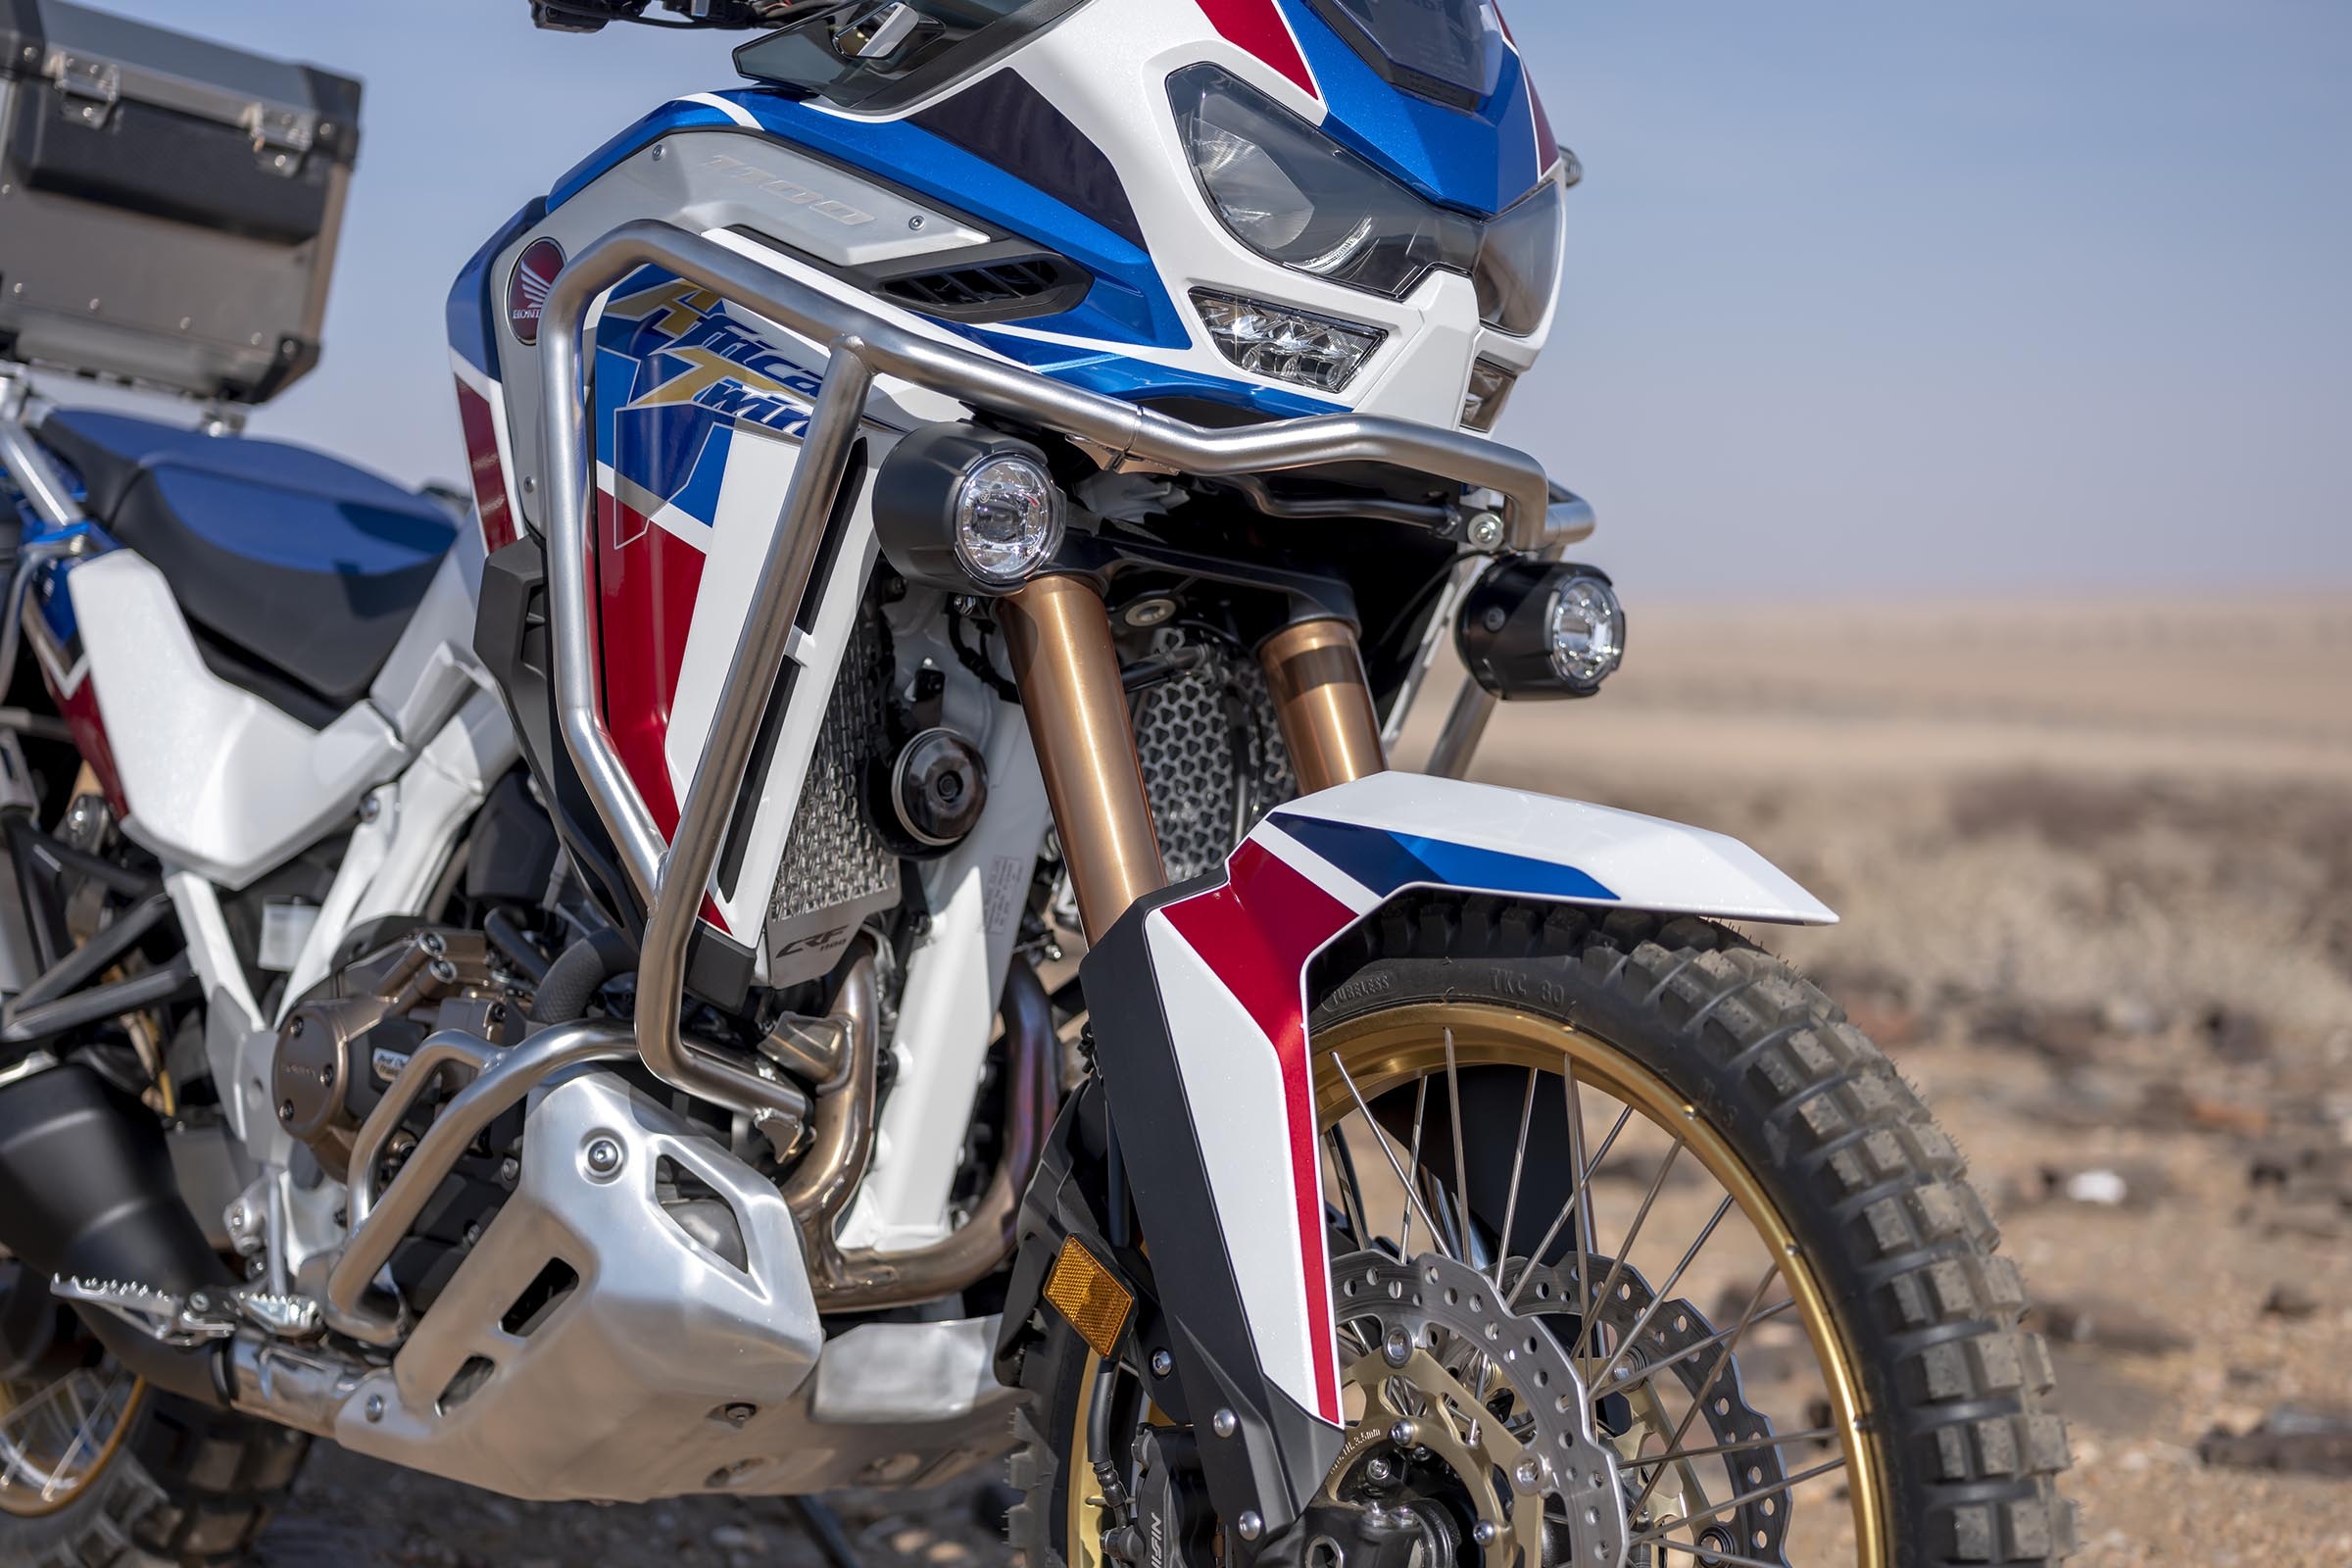 Honda Africa Twin, For sale by owner, Top sellers, Auto, 2400x1600 HD Desktop